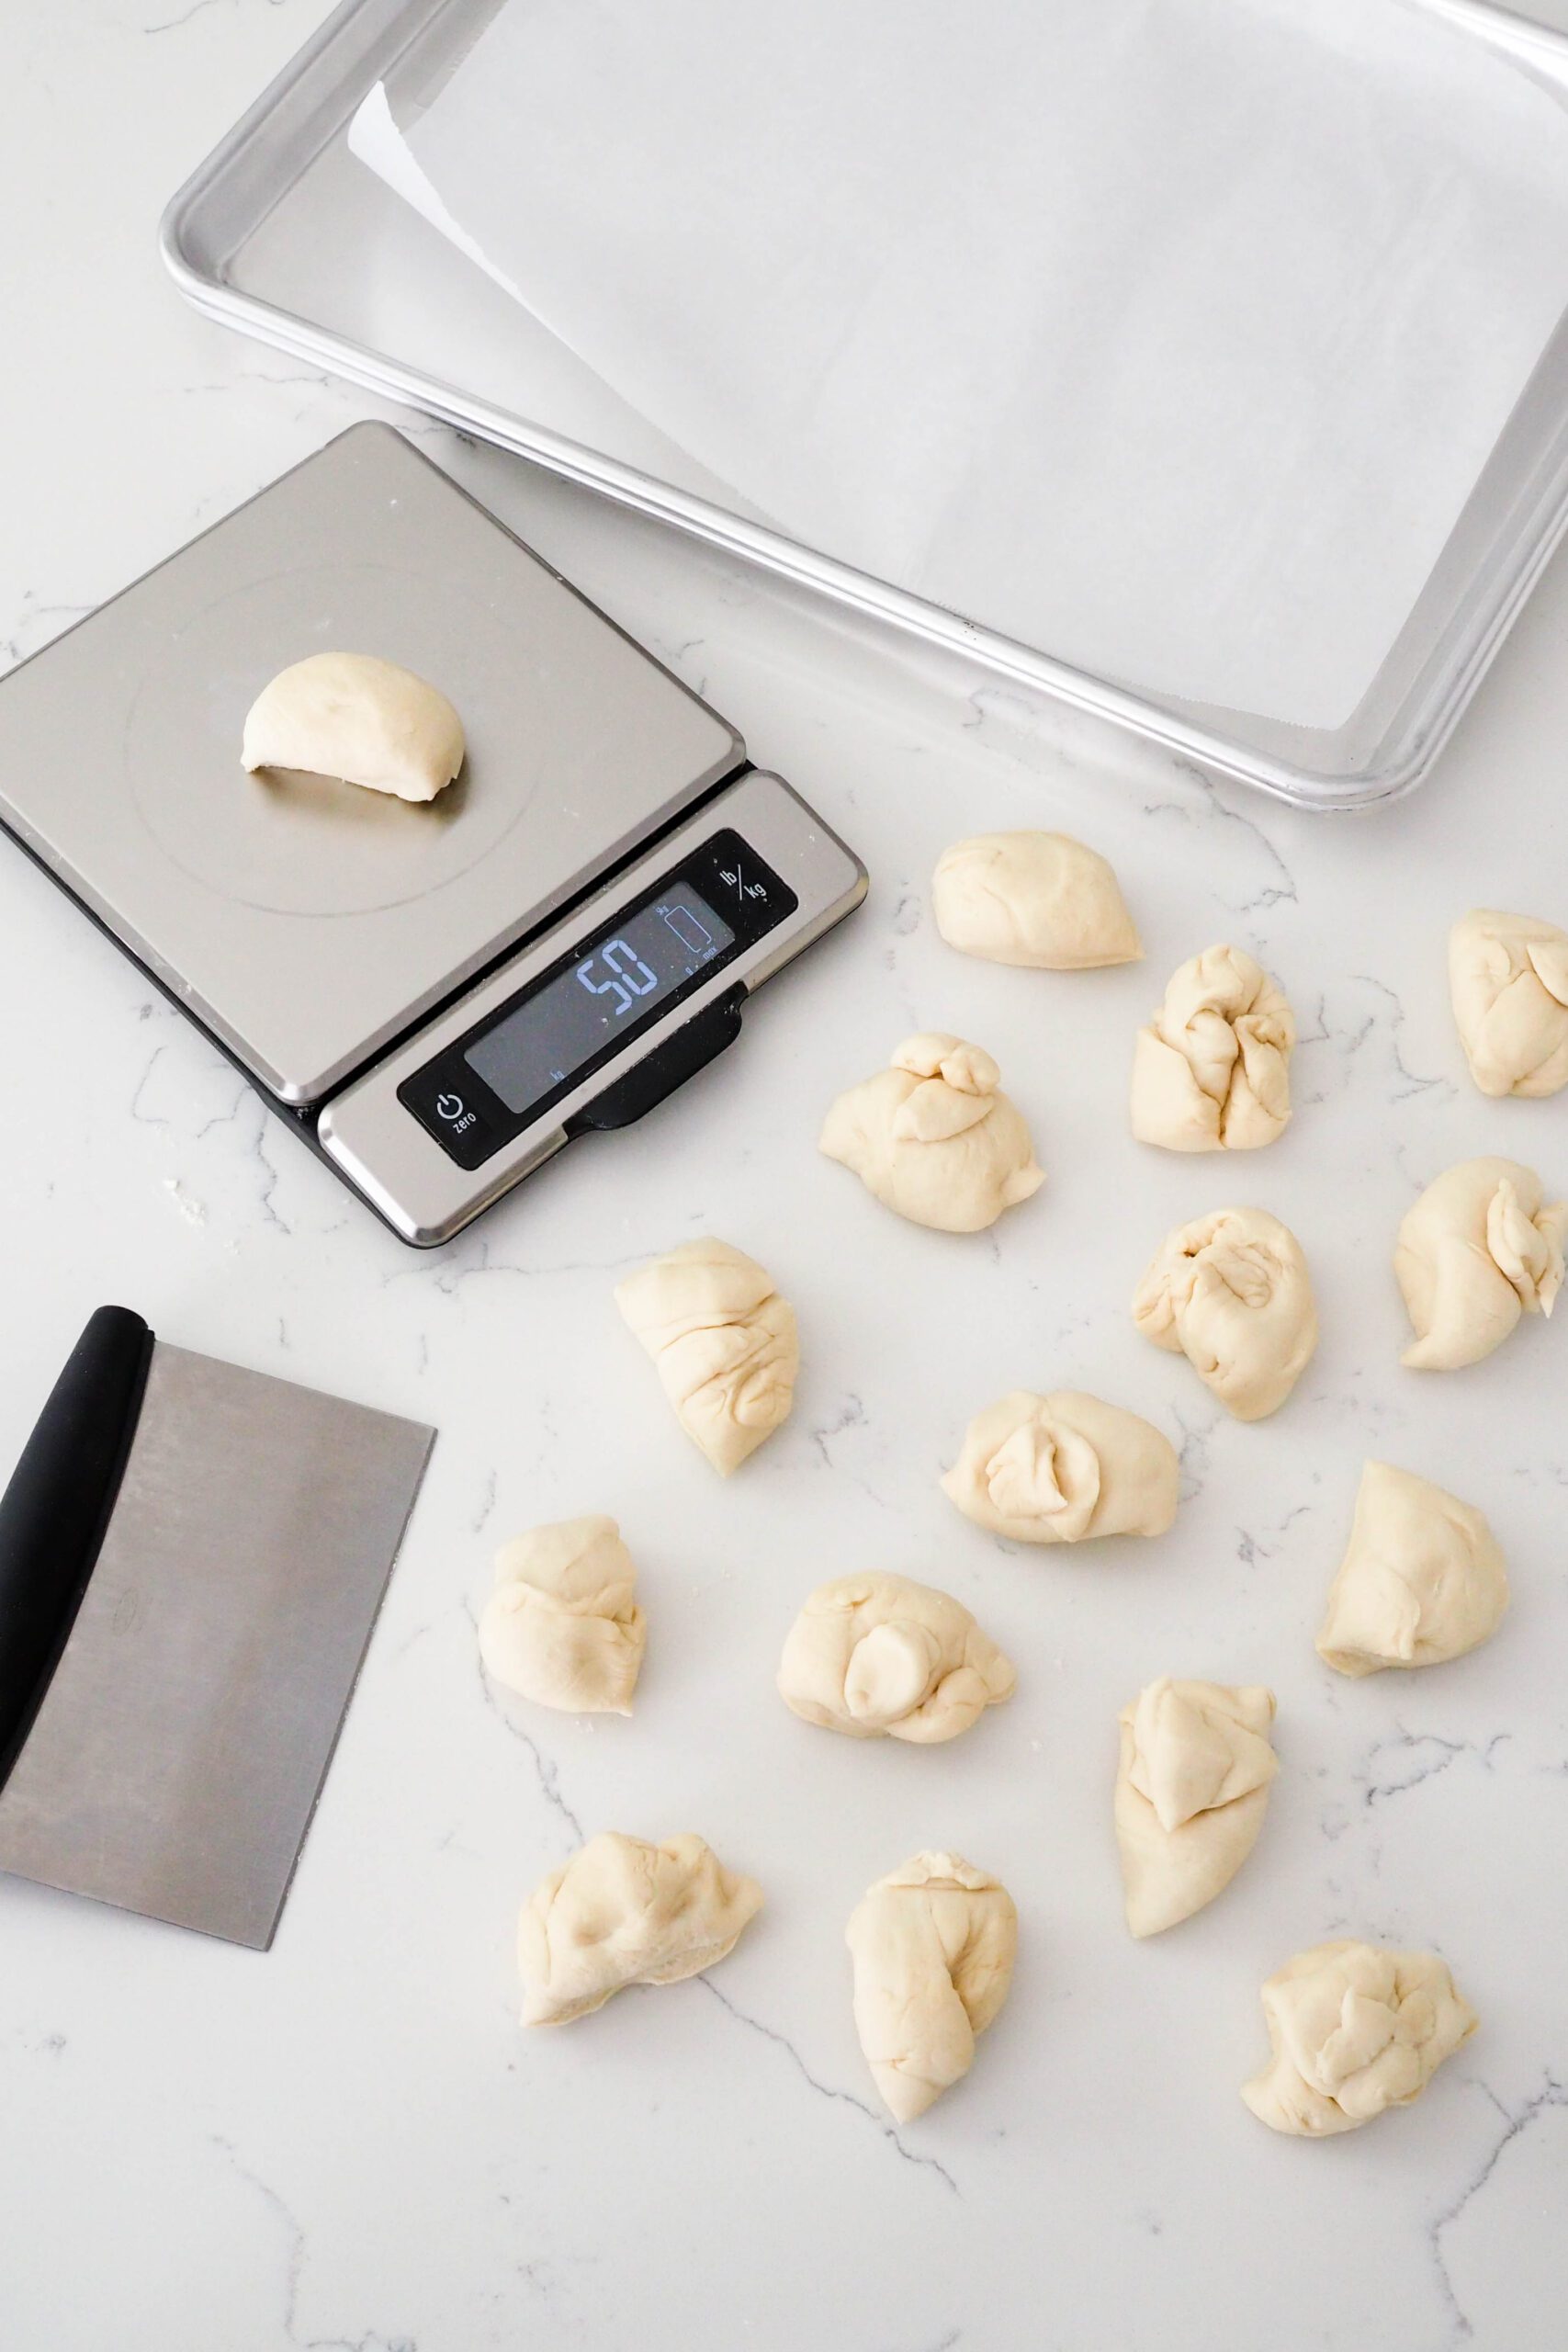 16 pieces of enriched dough are divided on a counter.